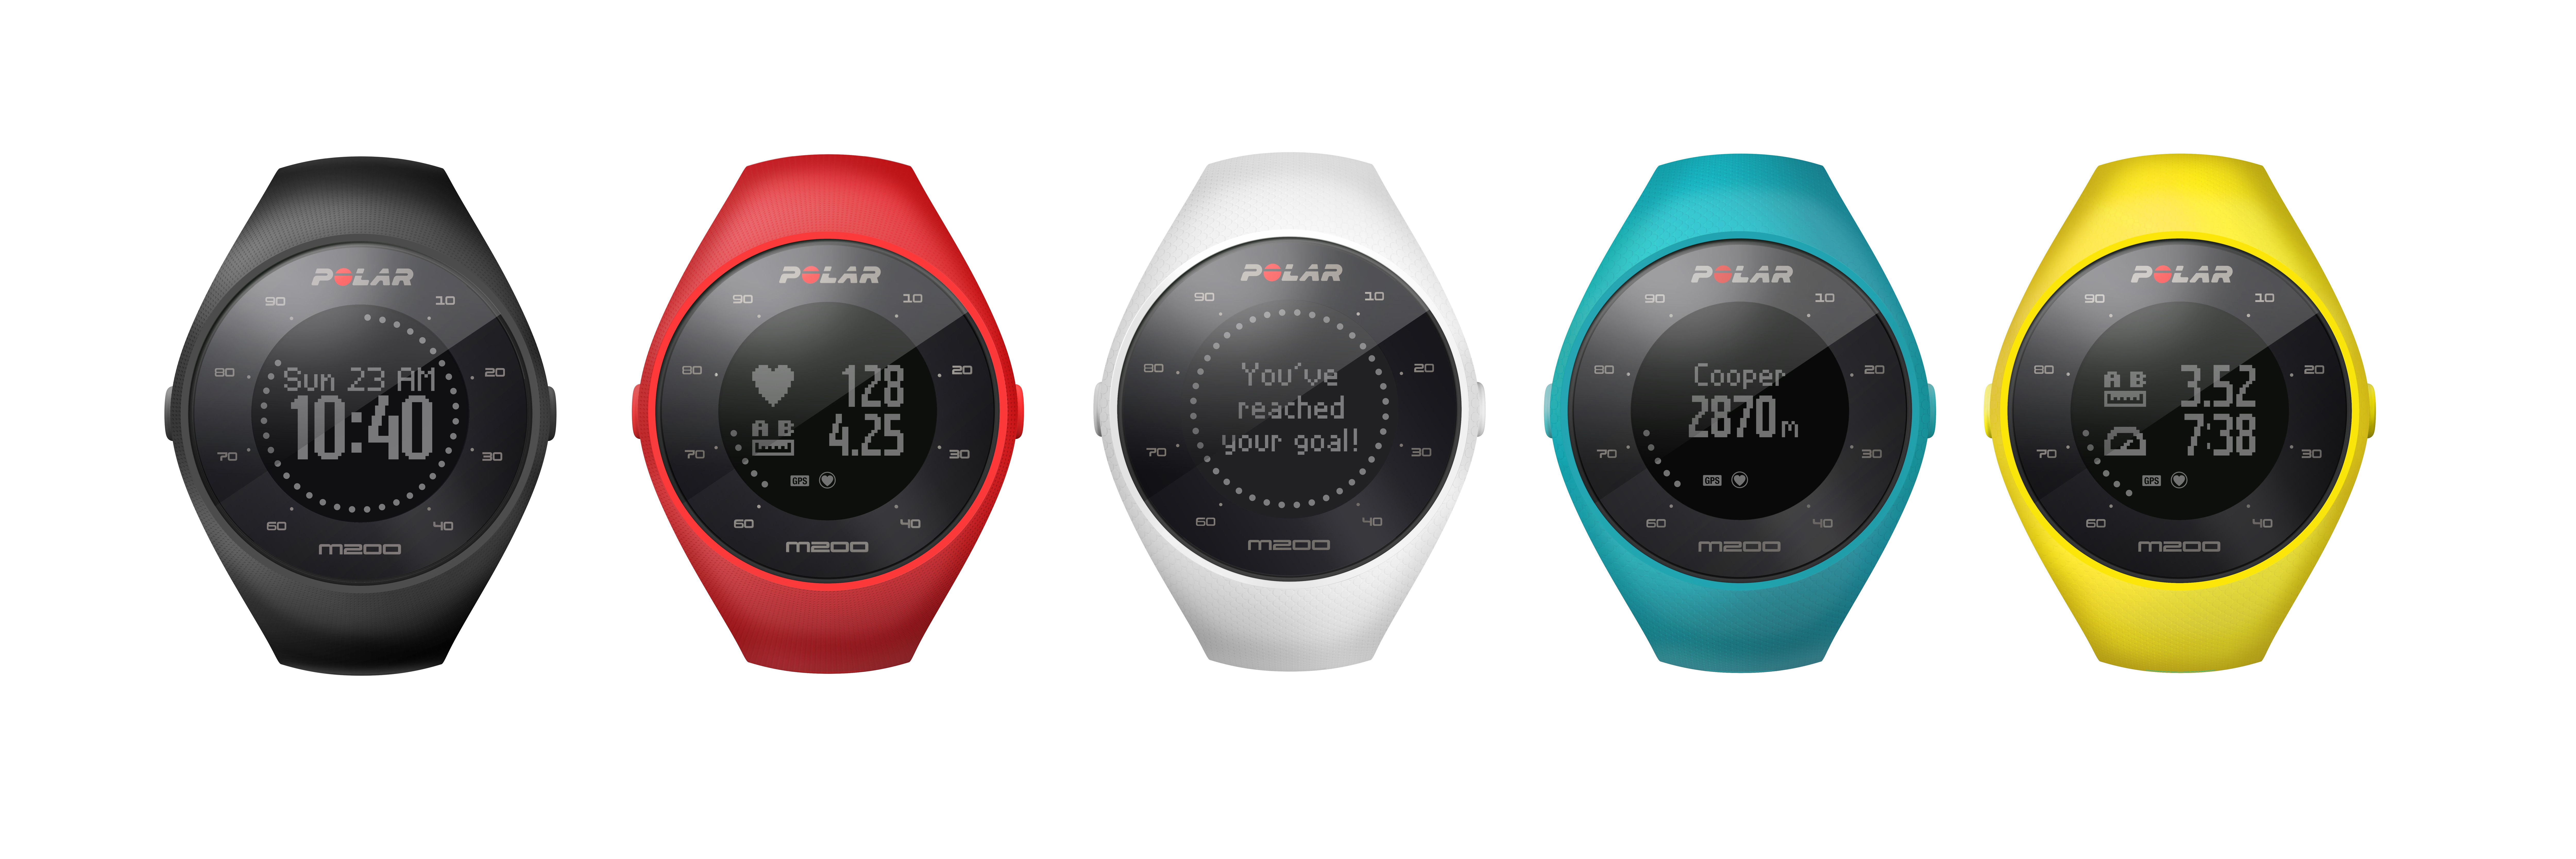 polar m200 is an affordable gps running watch with heart rate tracking image 1